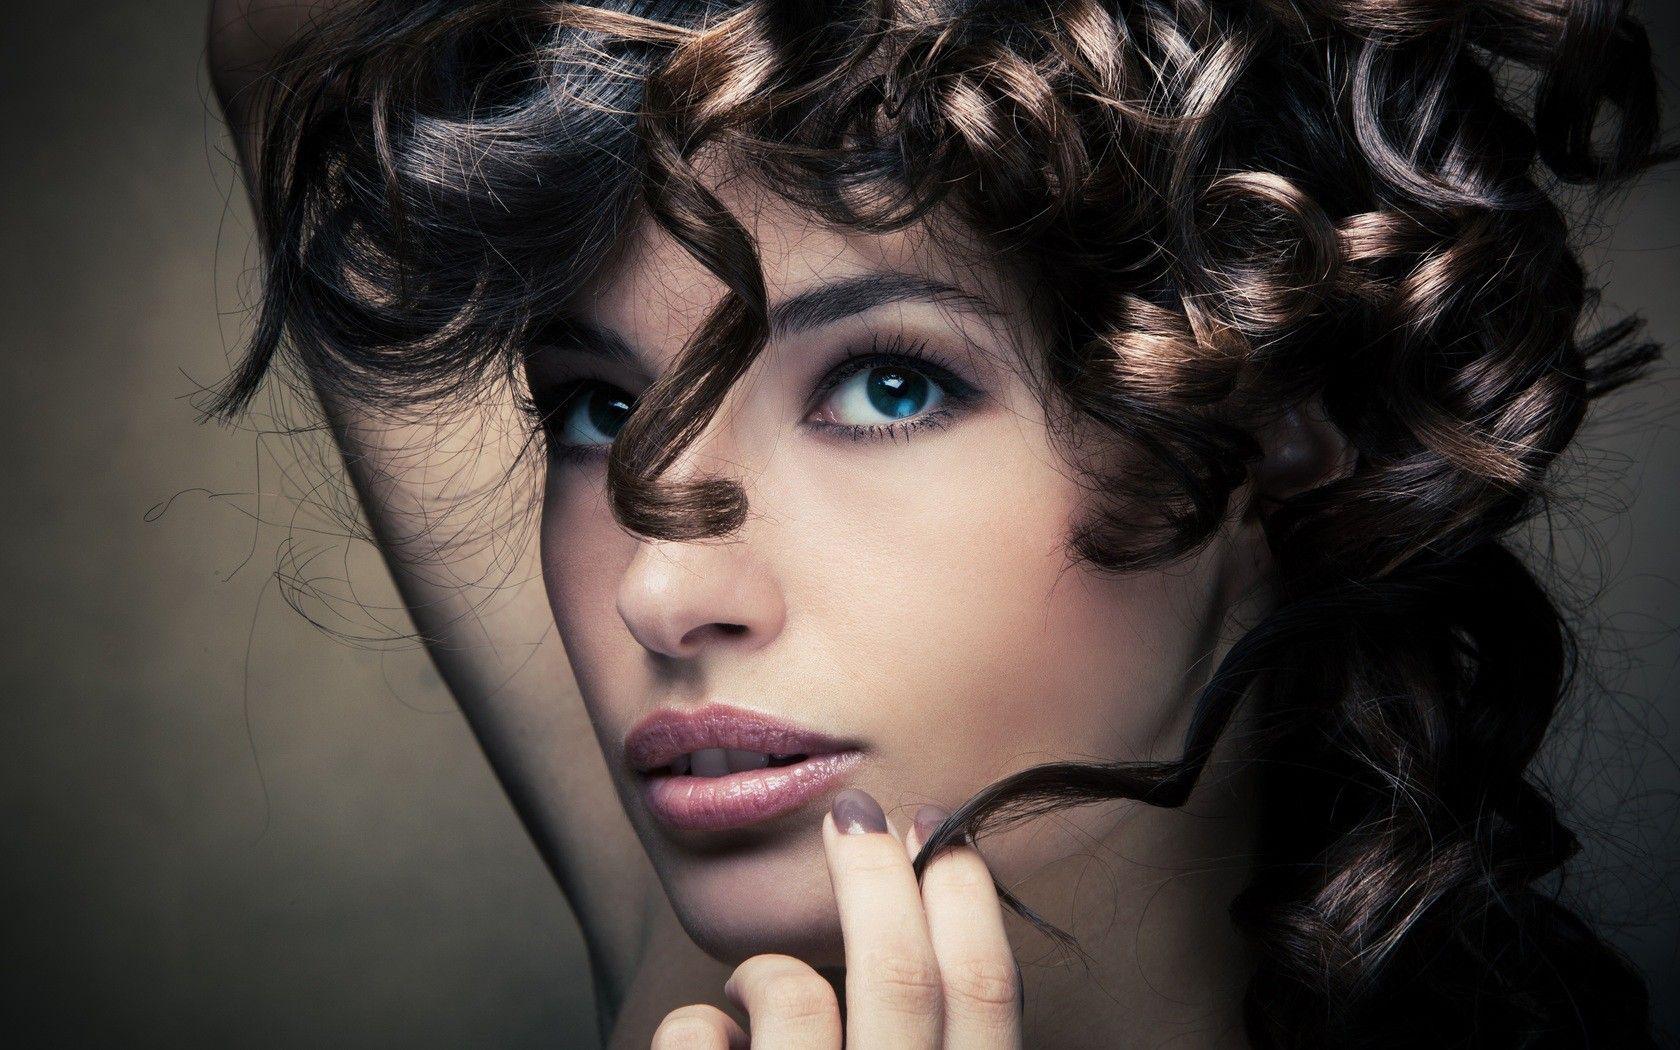 Model with curly hair wallpaper and image, picture